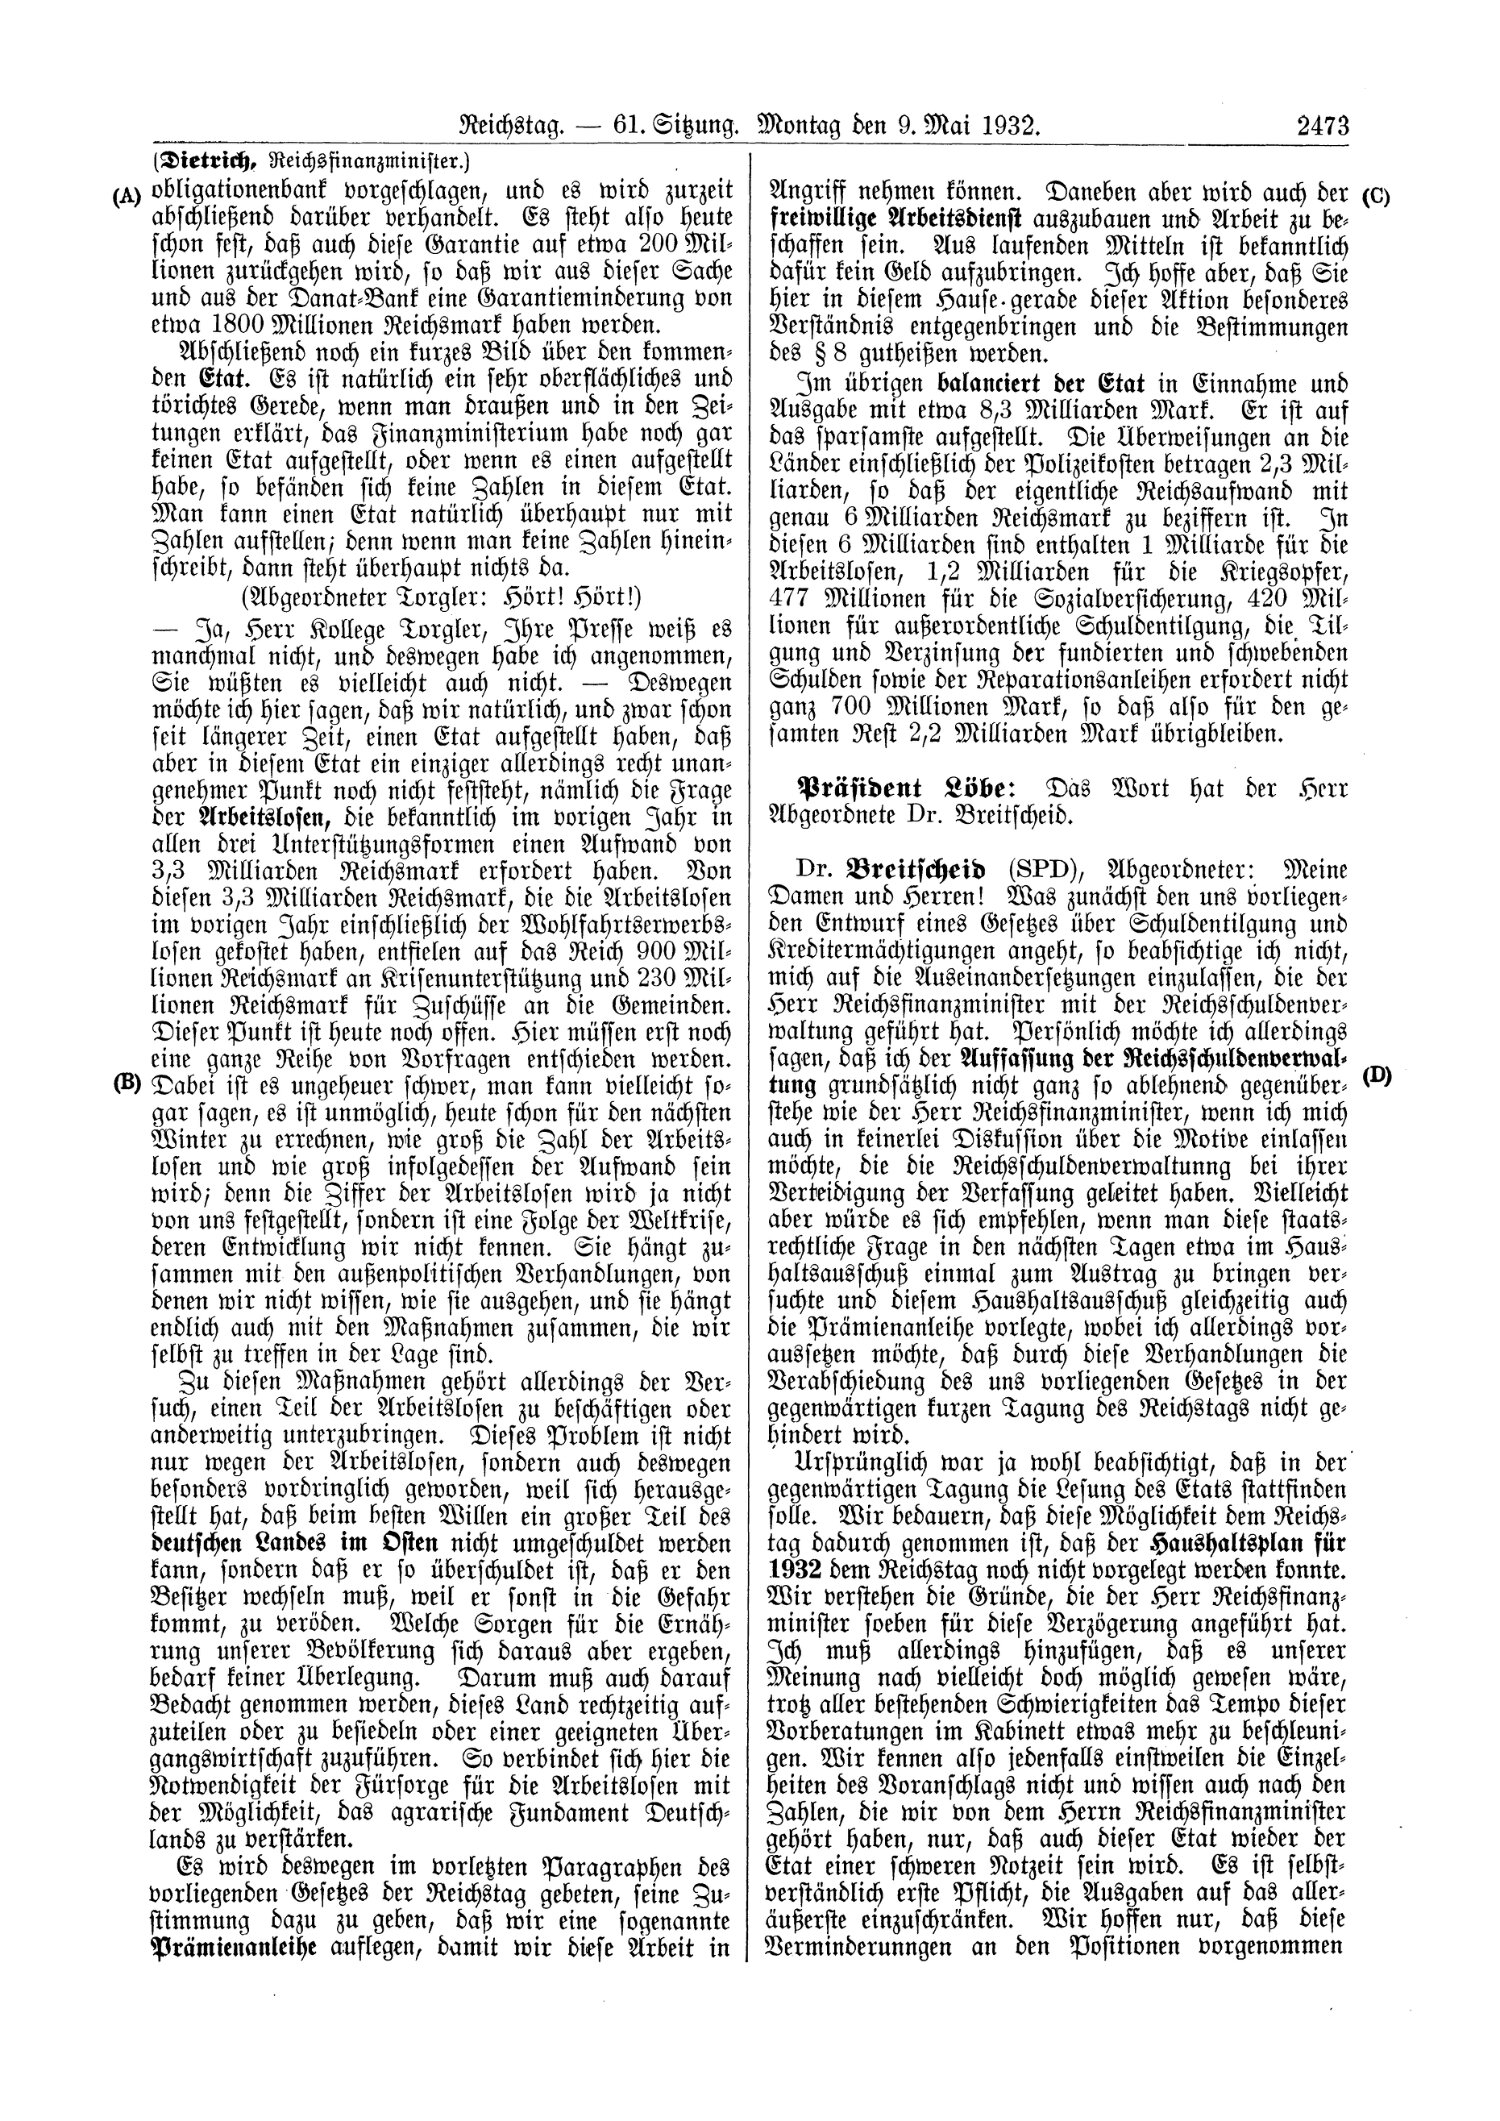 Scan of page 2473